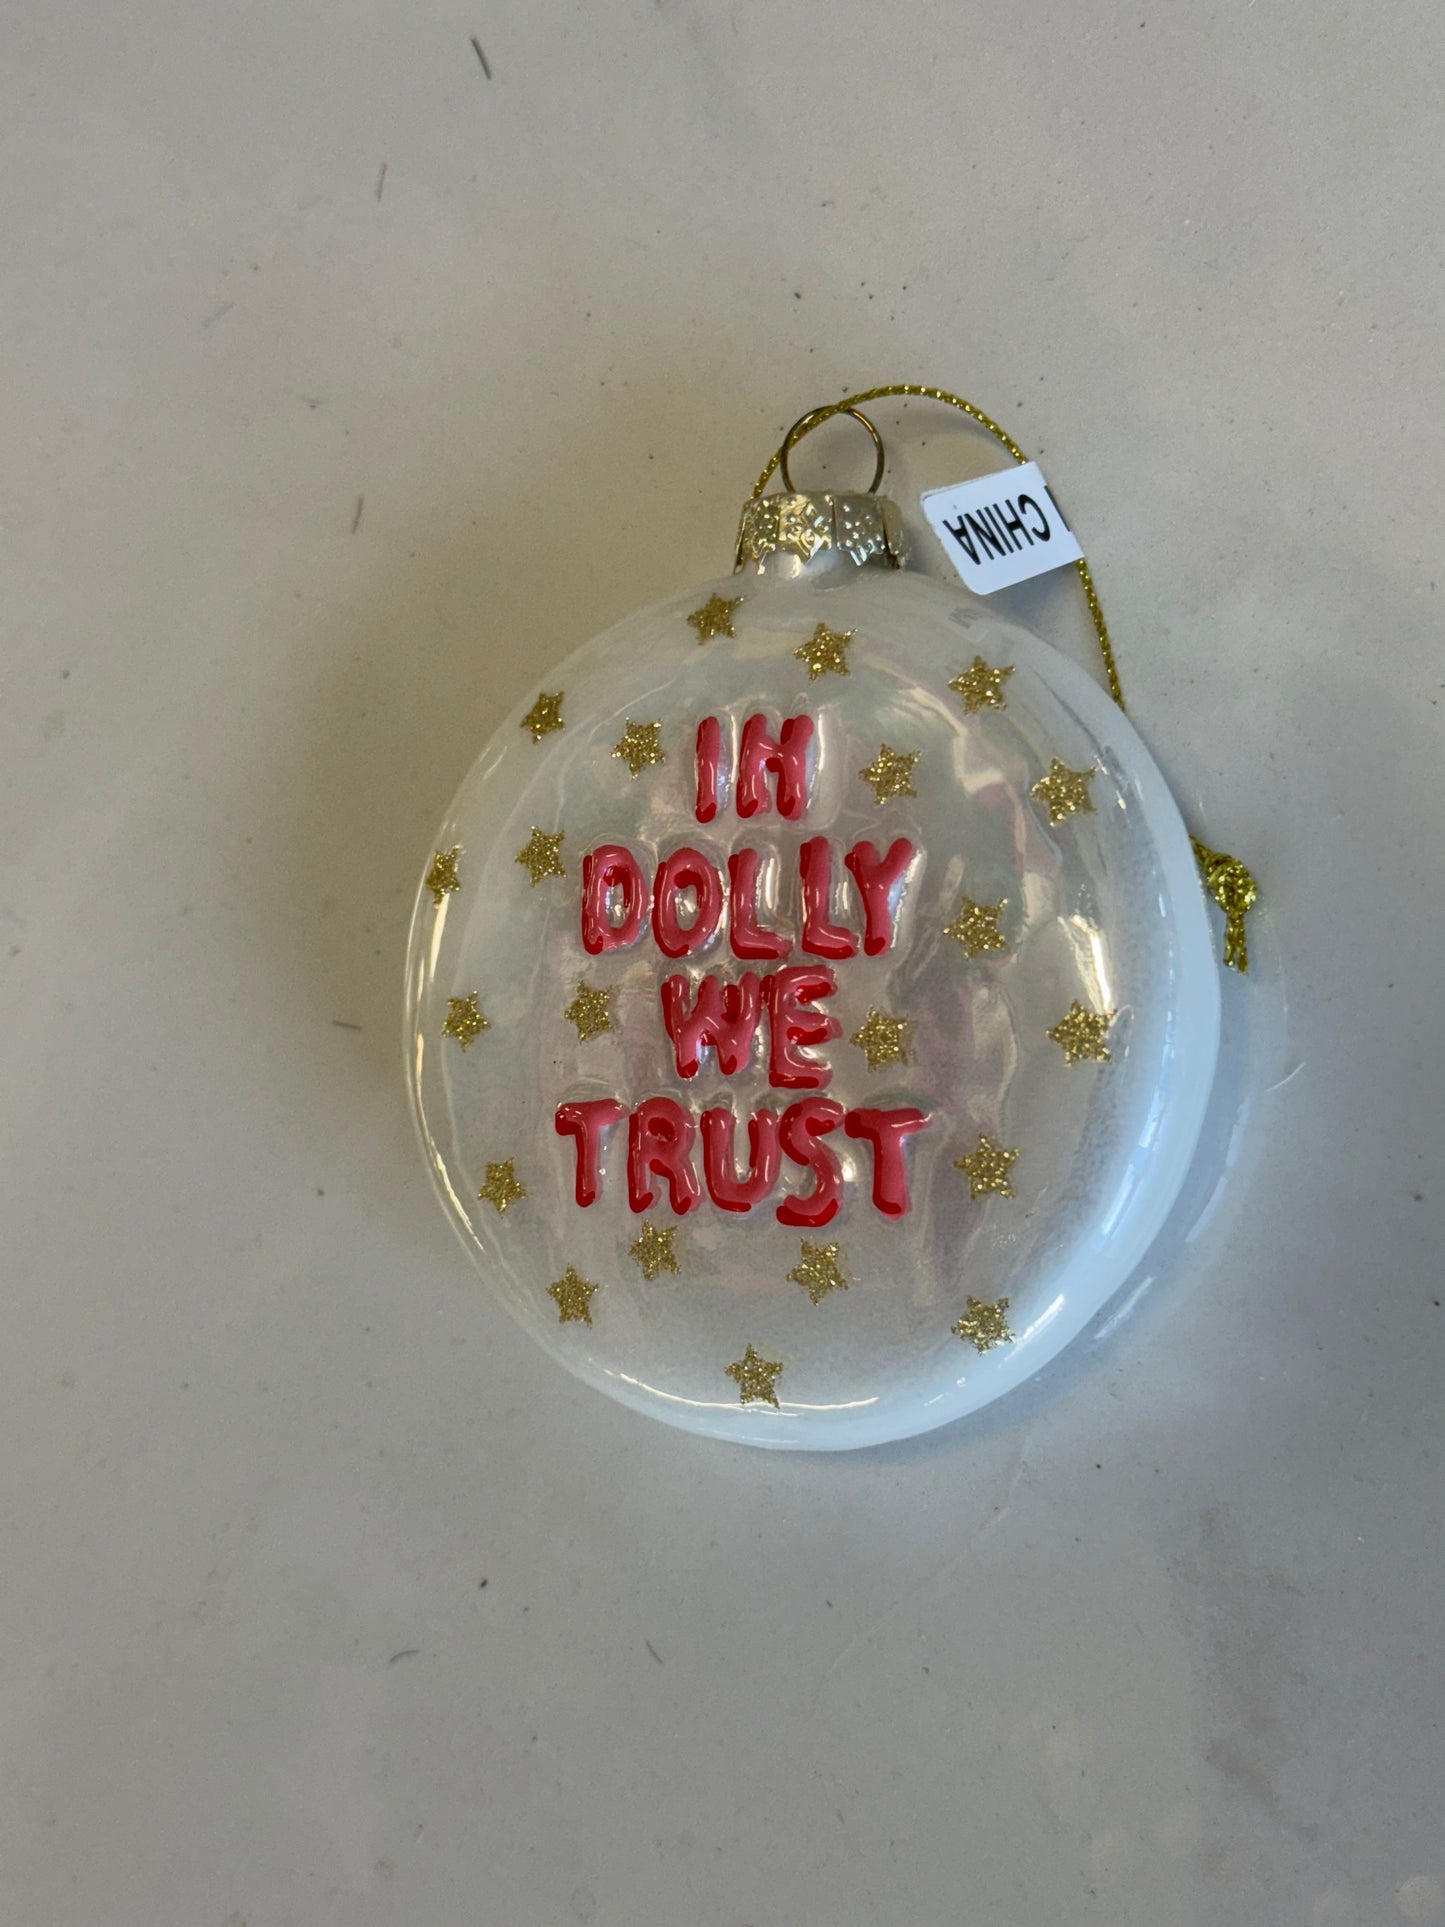 In Dolly We Trust Glass Ornament